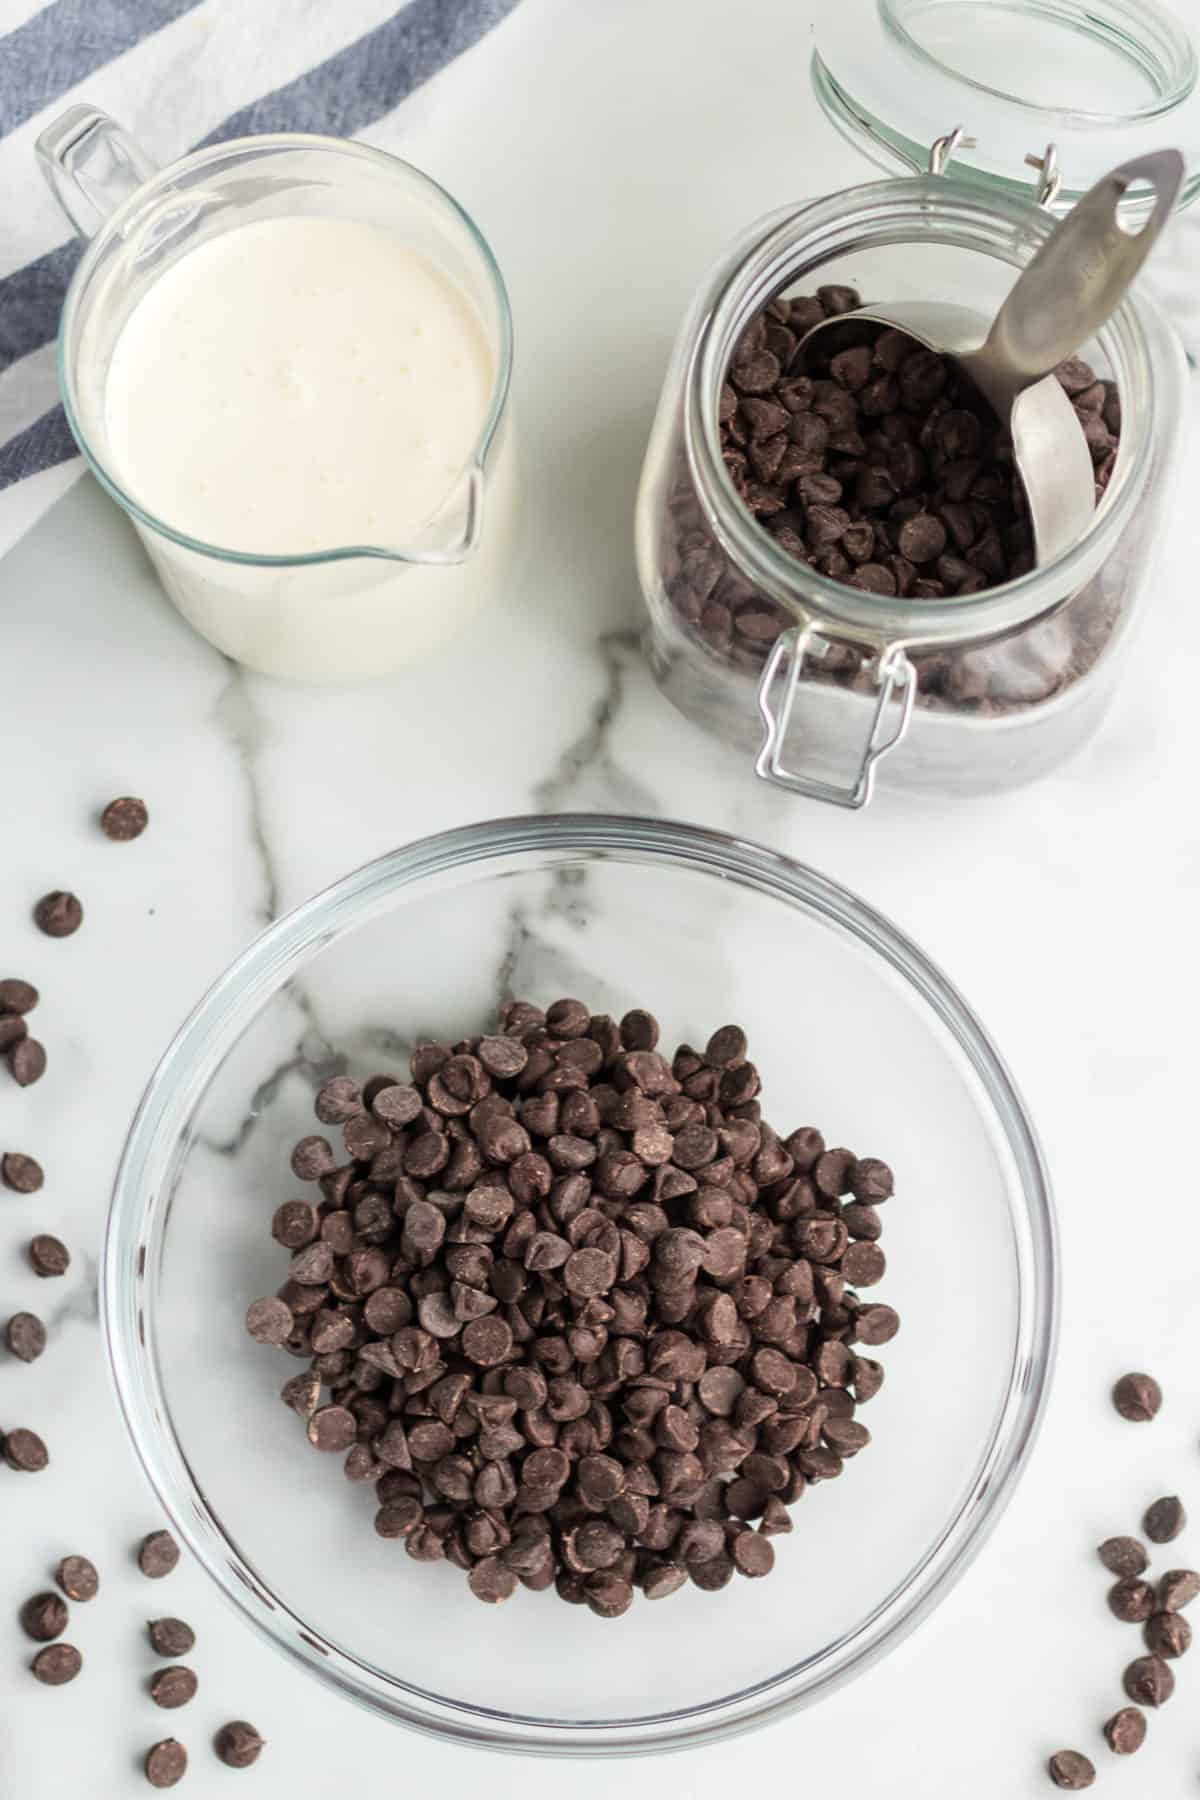 Picture of all the ingredients needed for the recipe including a glass bowl with chocolate chips, a small jug of heavy whipping cream, and a jar with extra chocolate chips with a measuring cup in it. 